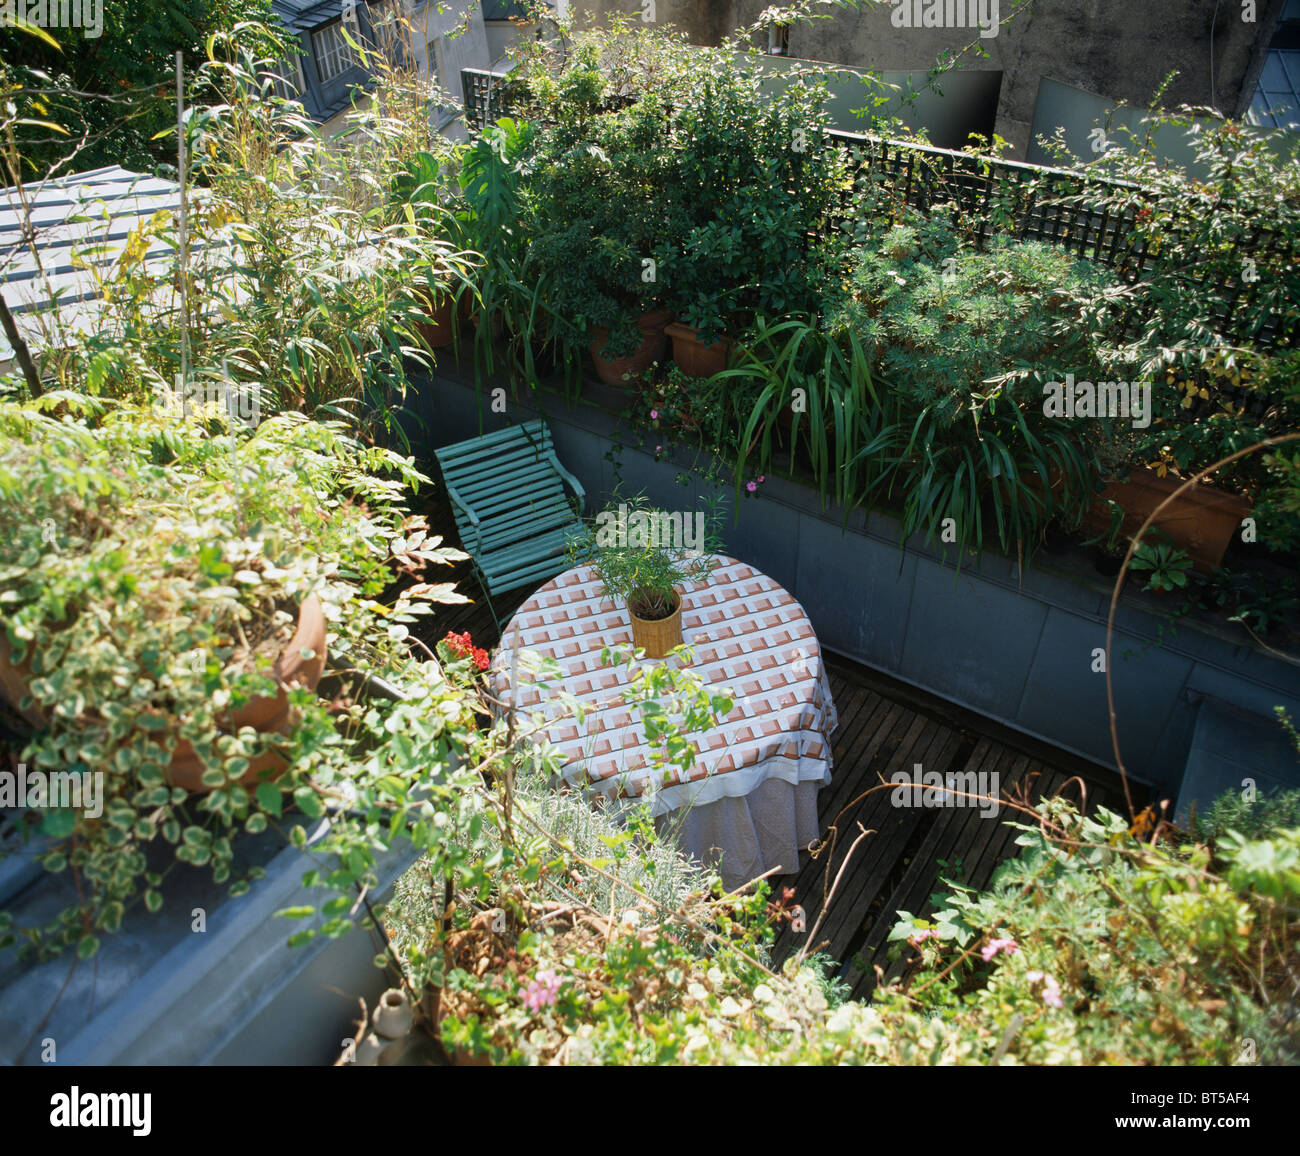 Looking down on seating area on decked roof terrace surrounded with shrubs, perennials and bamboo in pots. Stock Photo